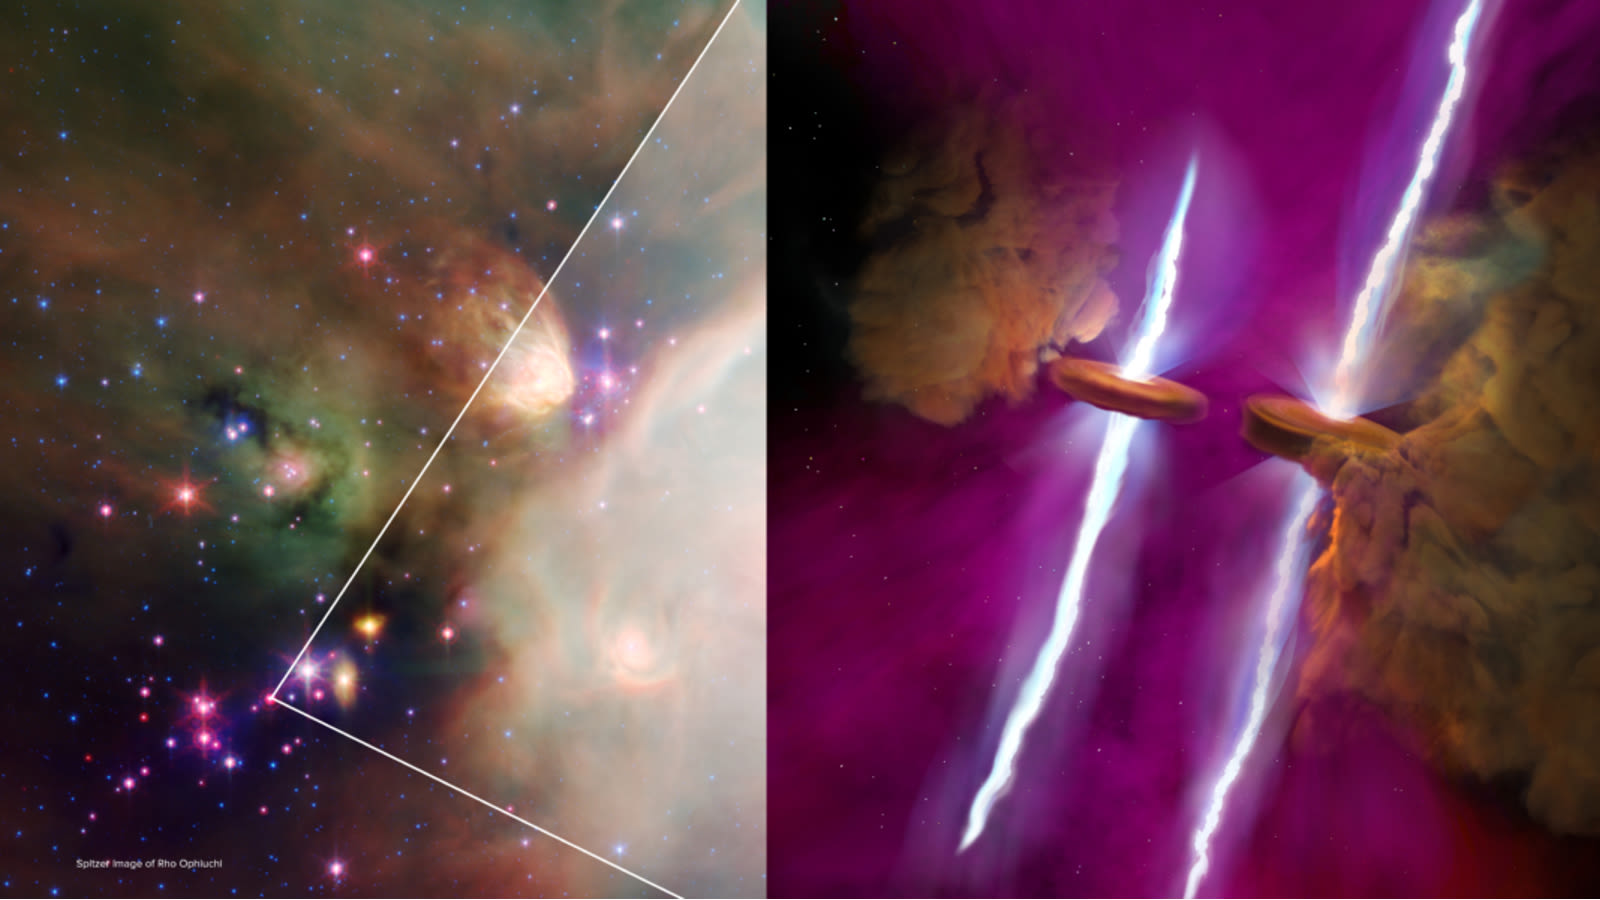 James Webb telescope reveals long-studied baby star is actually 'twins' — and they're throwing identical tantrums